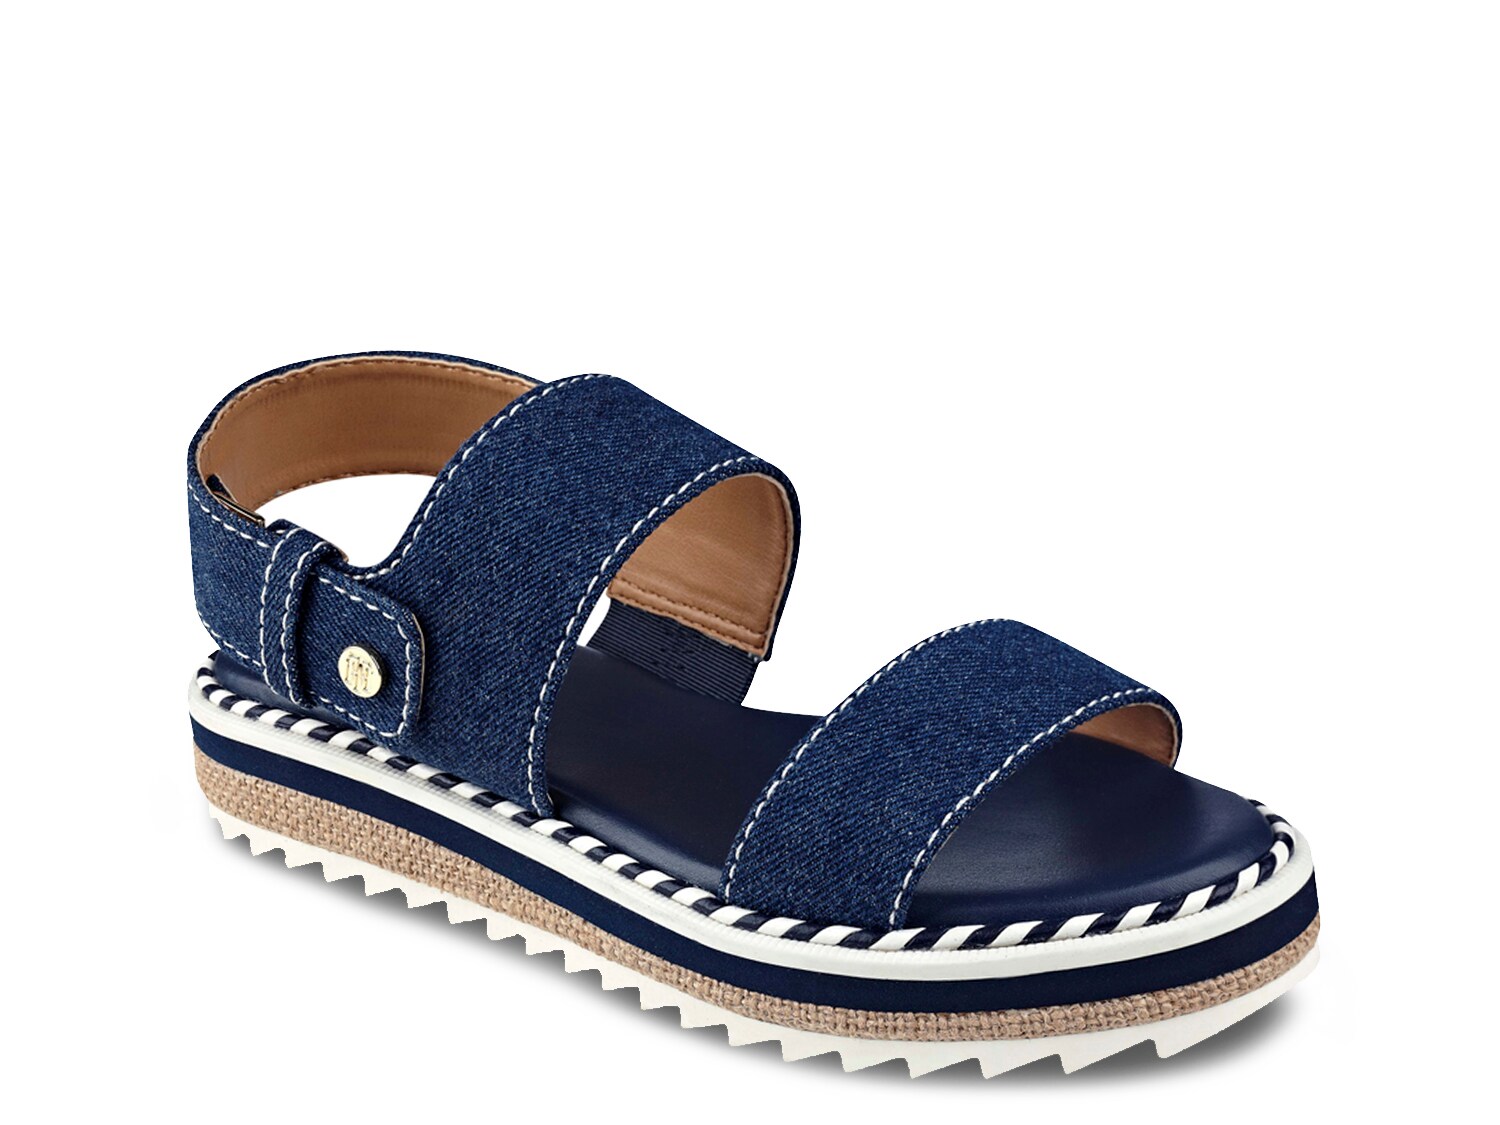 Tommy Hilfiger Madie Espadrille Sandal - Free Shipping | DSW